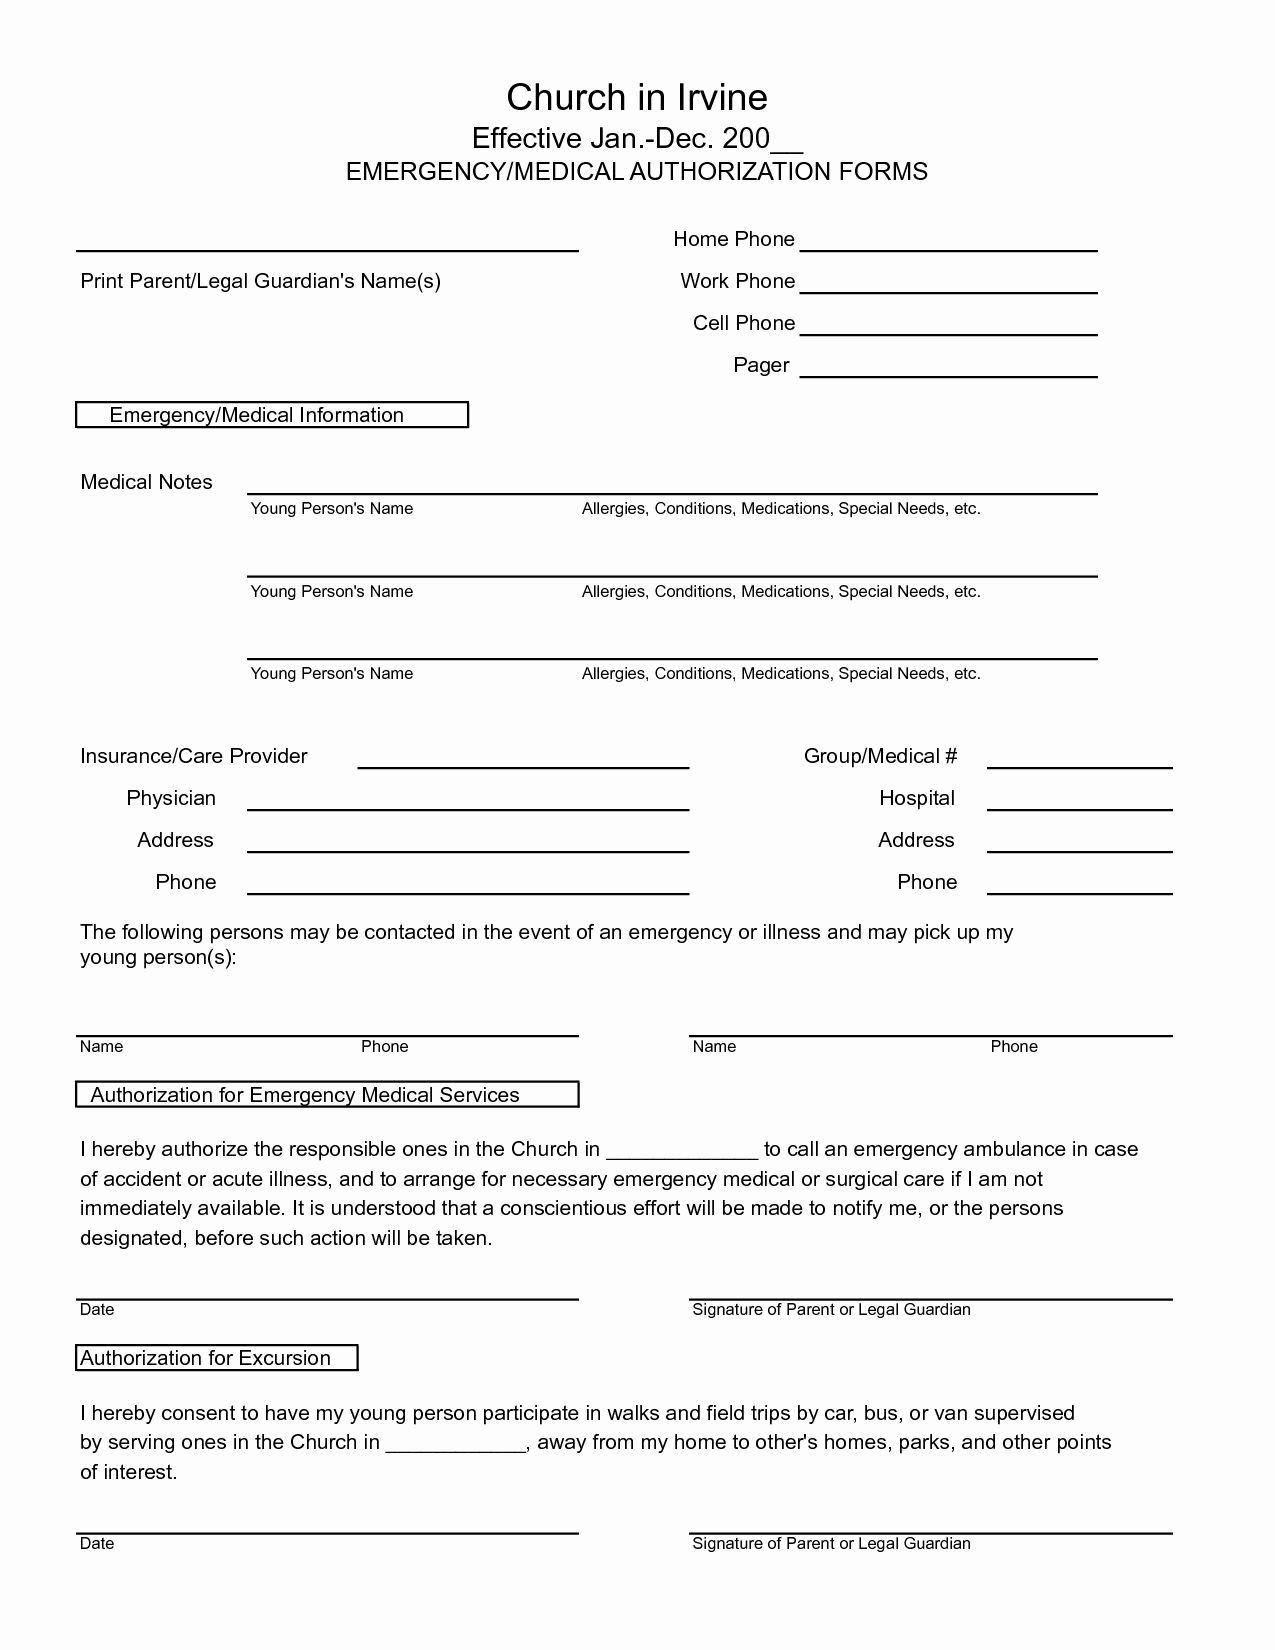 50 Free Medical Forms Templates | Culturatti - Free Printable Medical Forms